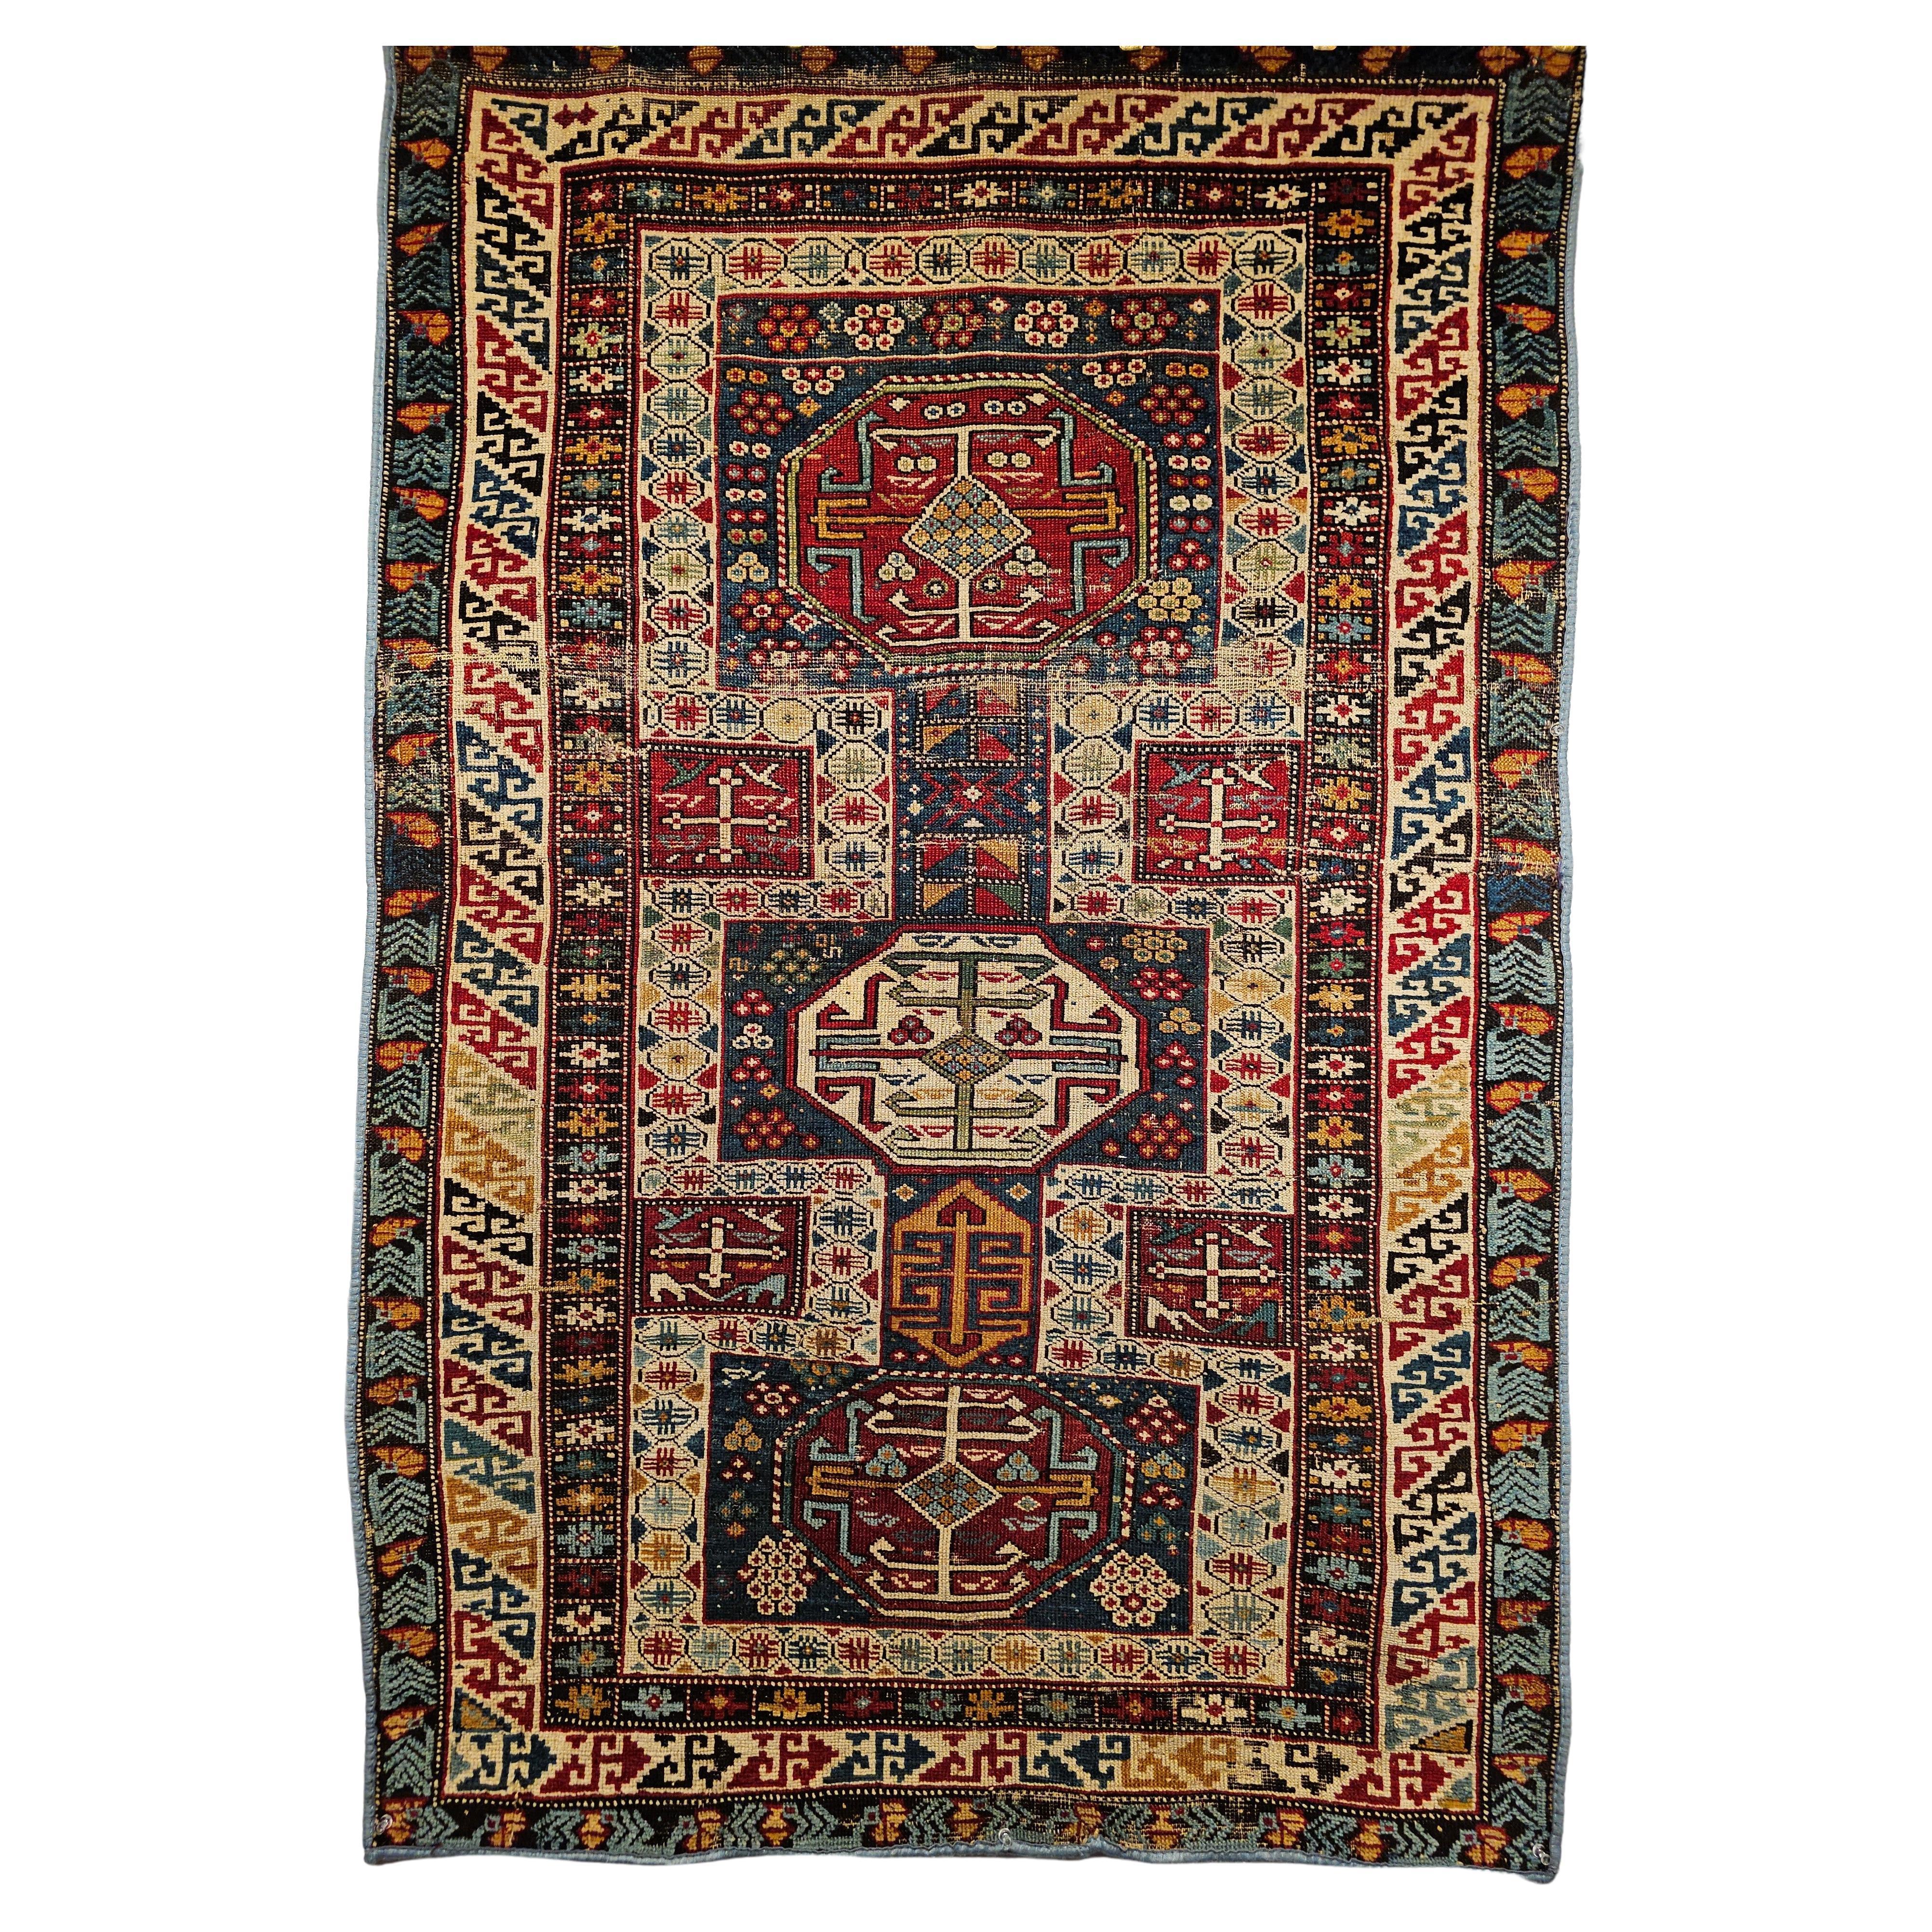  Early 1900s Caucasian Kuba Area Rug in French Blue, Red, Ivory, Yellow For Sale